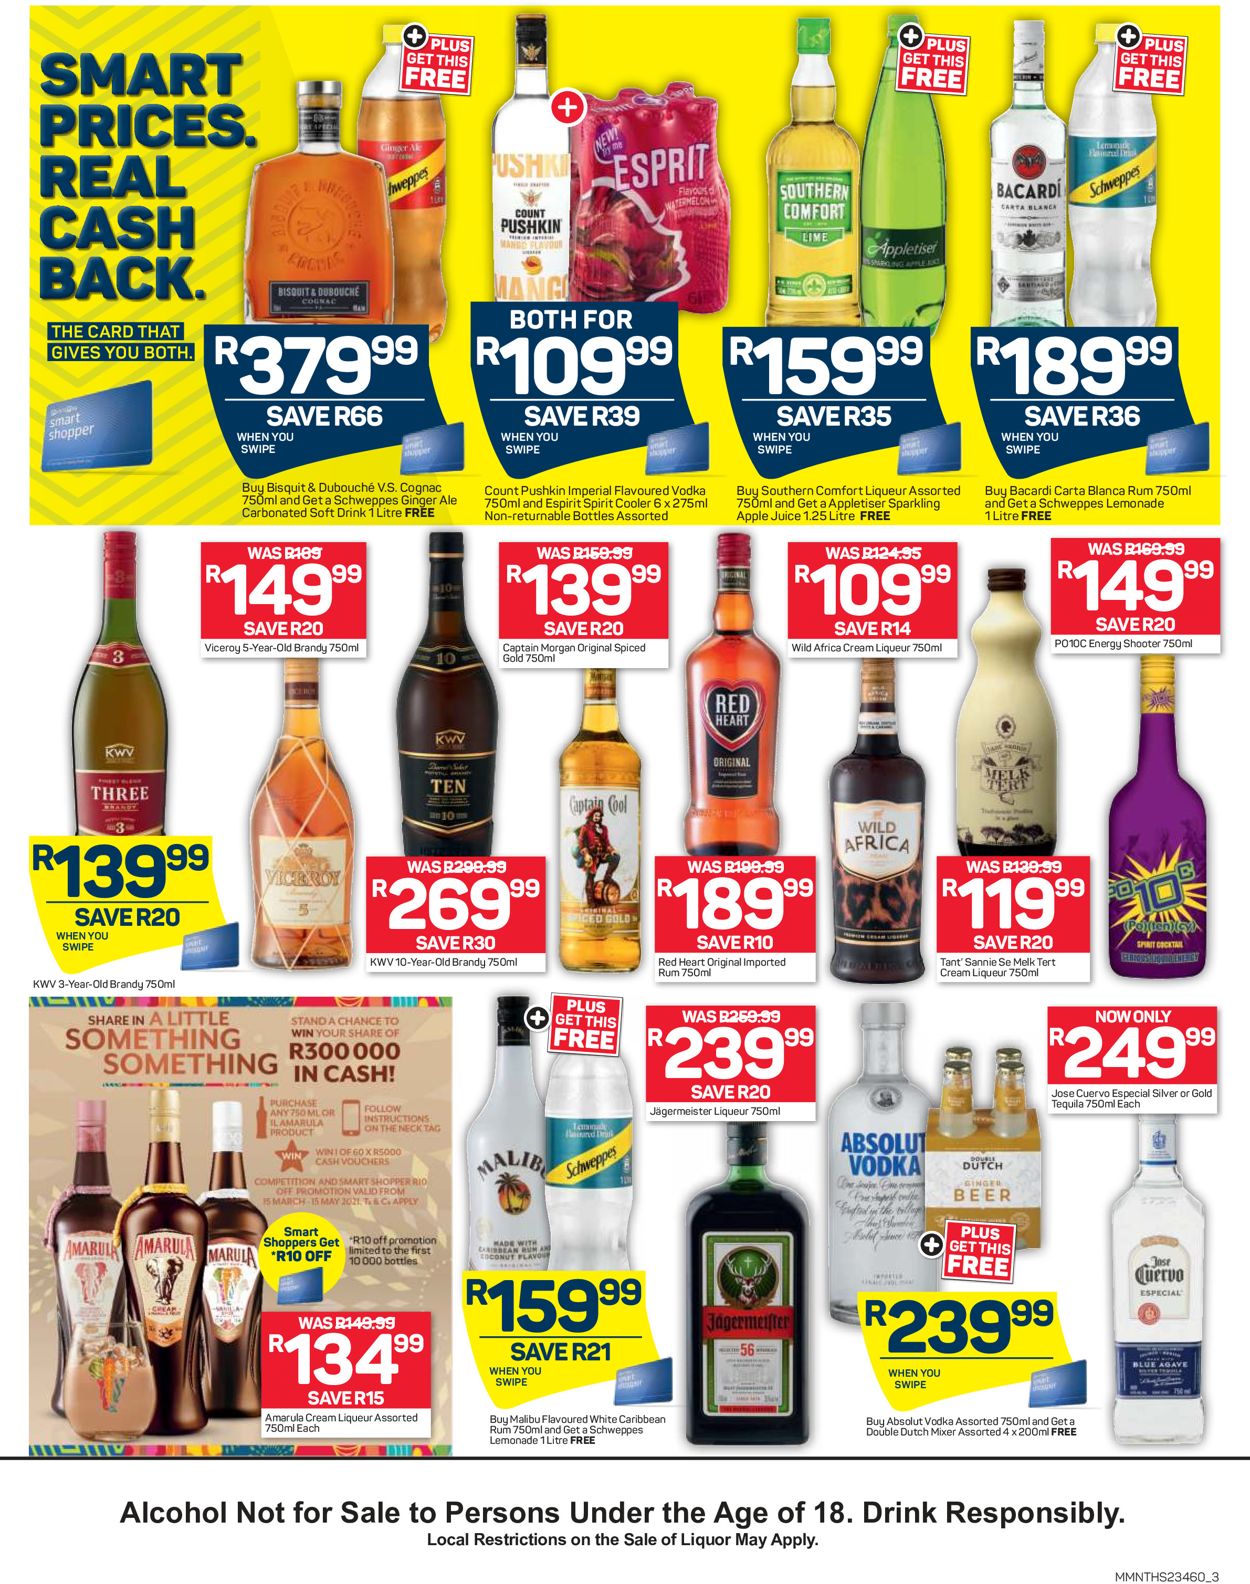 Pick n Pay Catalogue - 2021/03/23-2021/04/05 (Page 3)